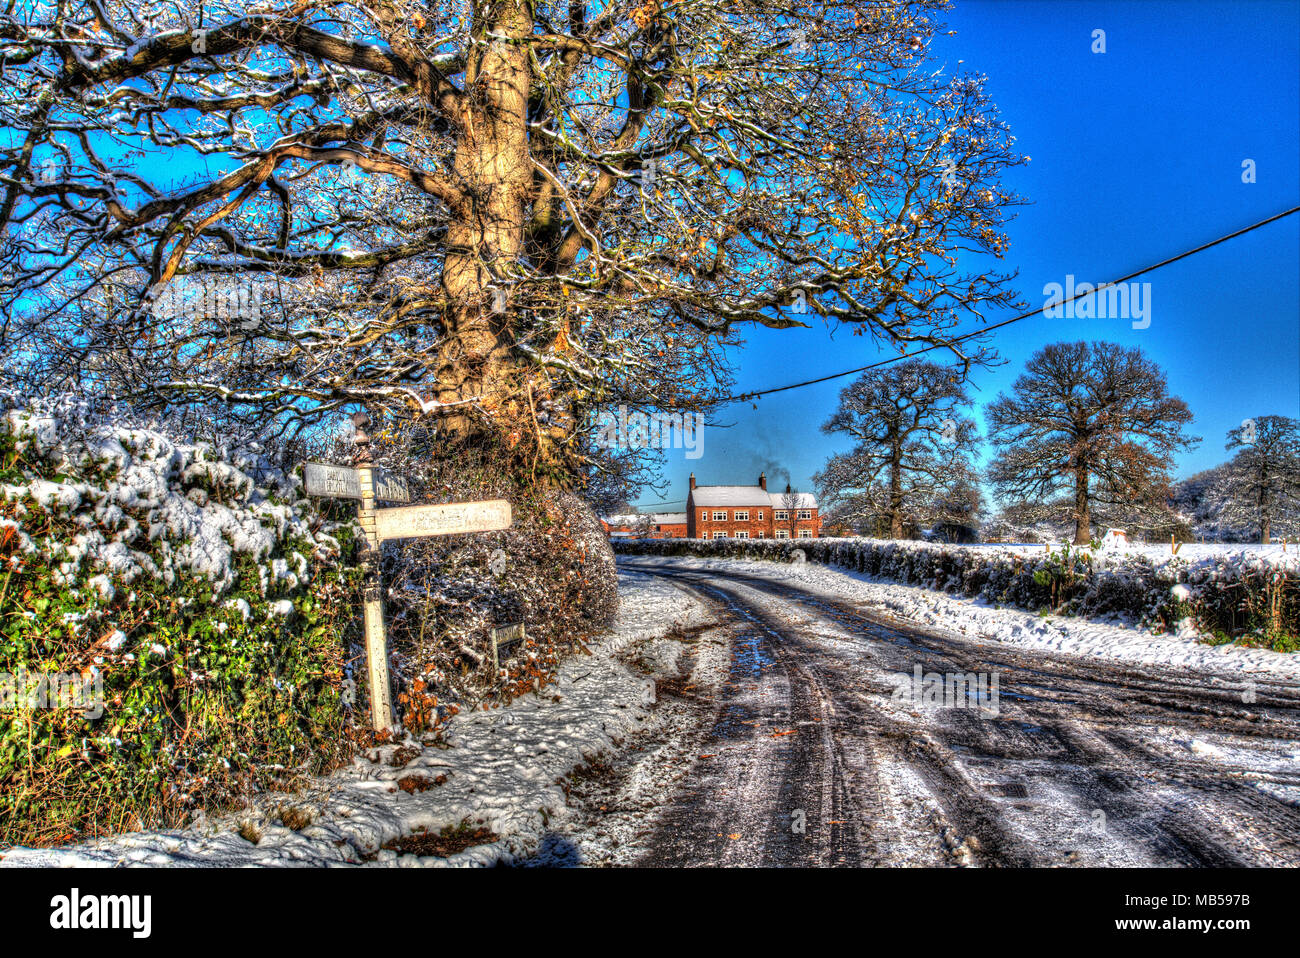 Village of Coddington, England. Artistic view of a rural snow covered pre Worboys direction sign, in rural Cheshire. Stock Photo